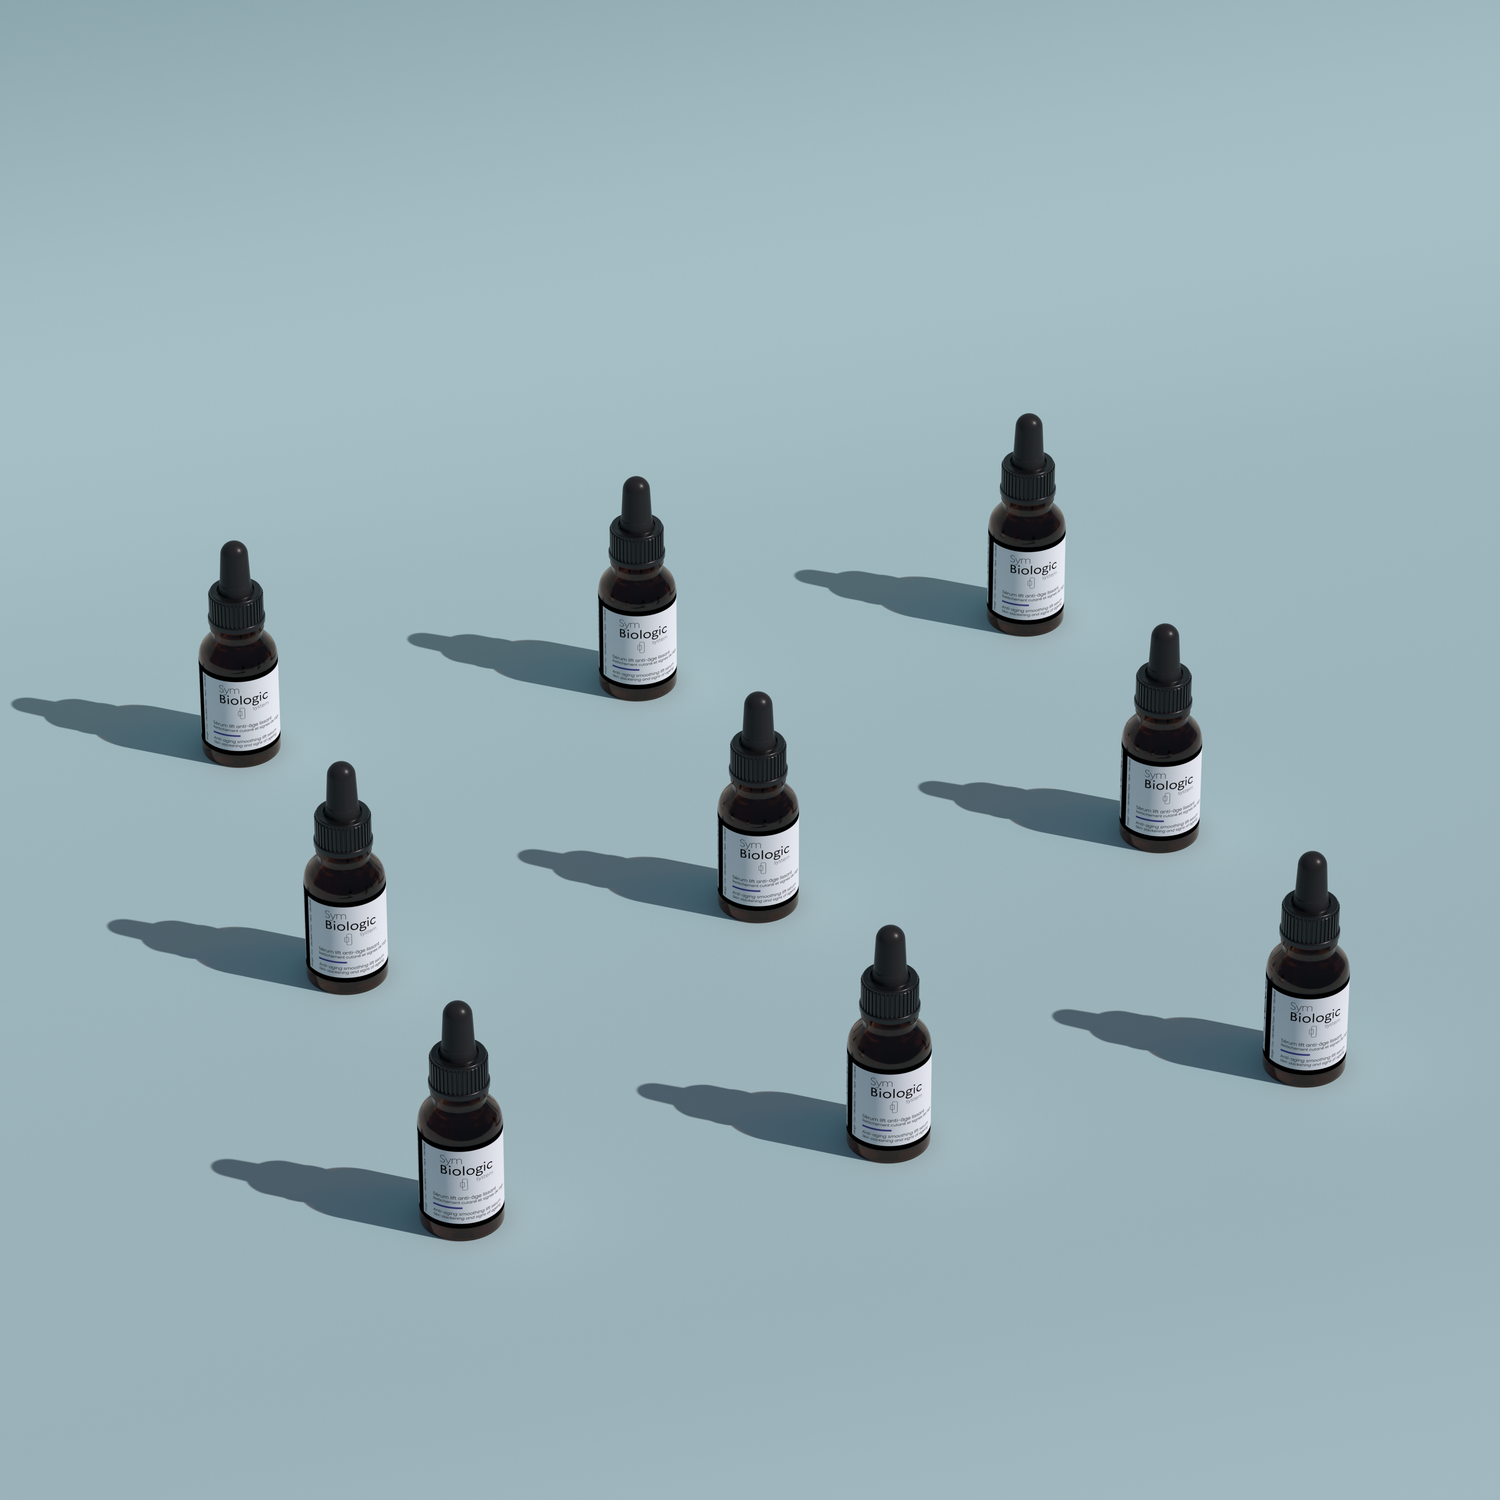 Image of nine Anti-Aging Smoothing Lift Serum bottles arranged in a 3x3 square, viewed from the side, against a light blue background, showcasing the sleek design of the glass dropper bottles.